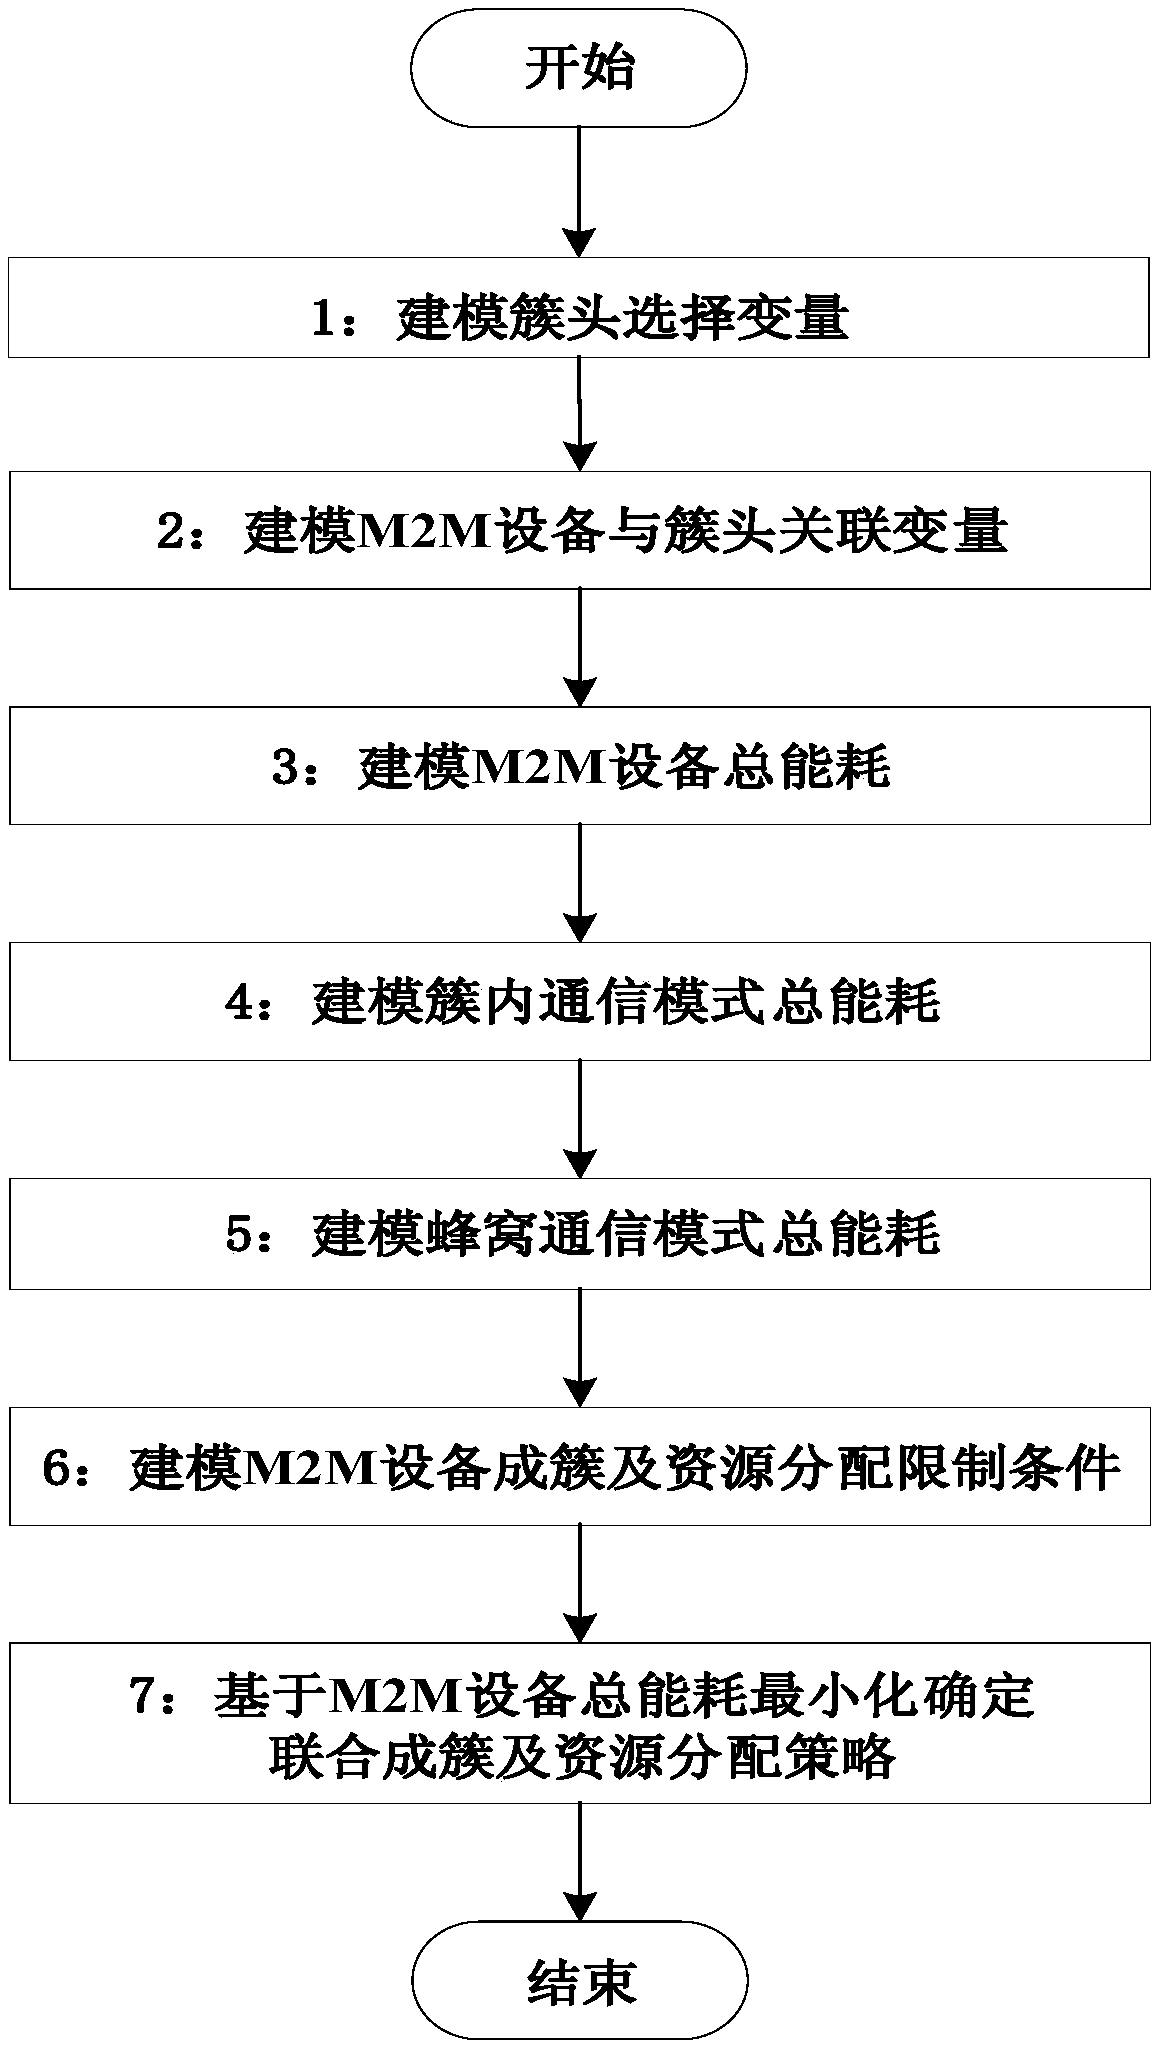 M2M communication combined clustering and resource allocation method based on energy consumption optimization